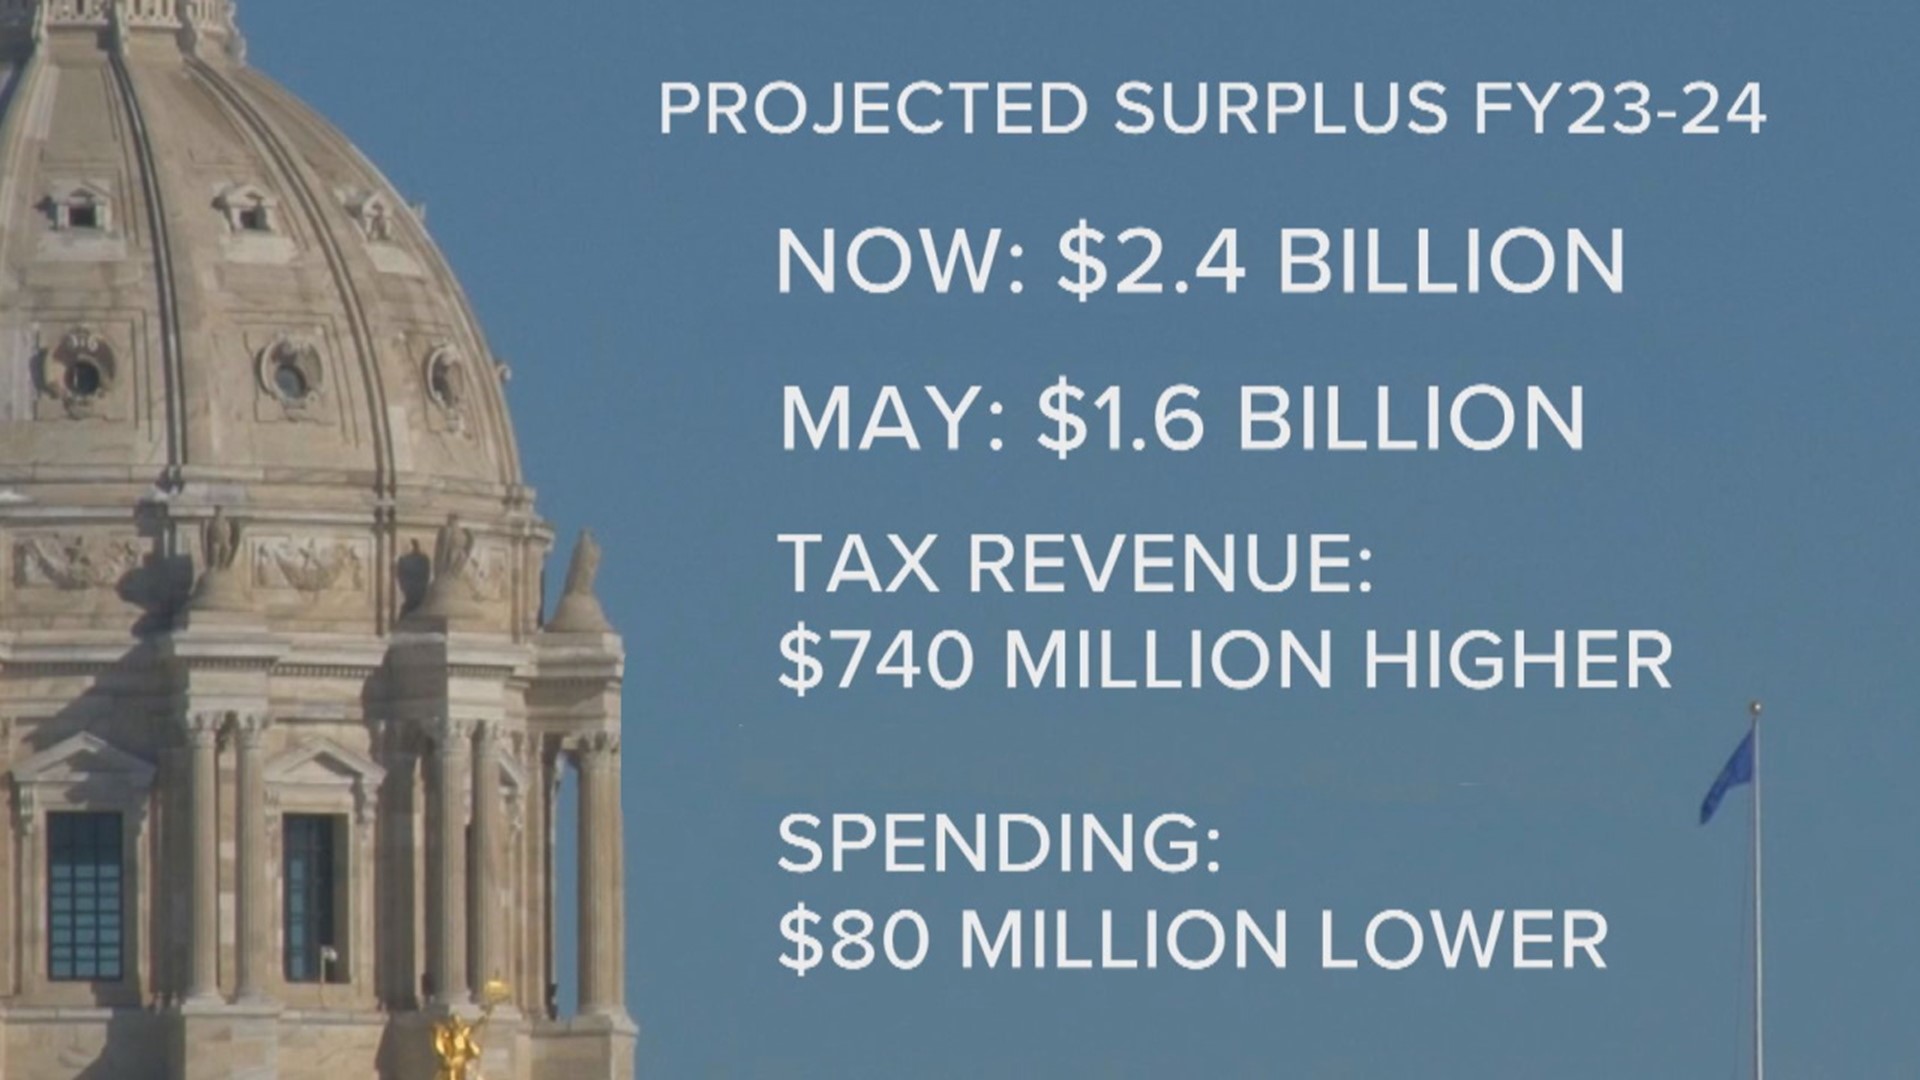 The budget surplus for FY 2023-24 is projected at $2.4 billion, $820 million higher than May's prediction. Tax revenue was higher than expected, spending was lower.